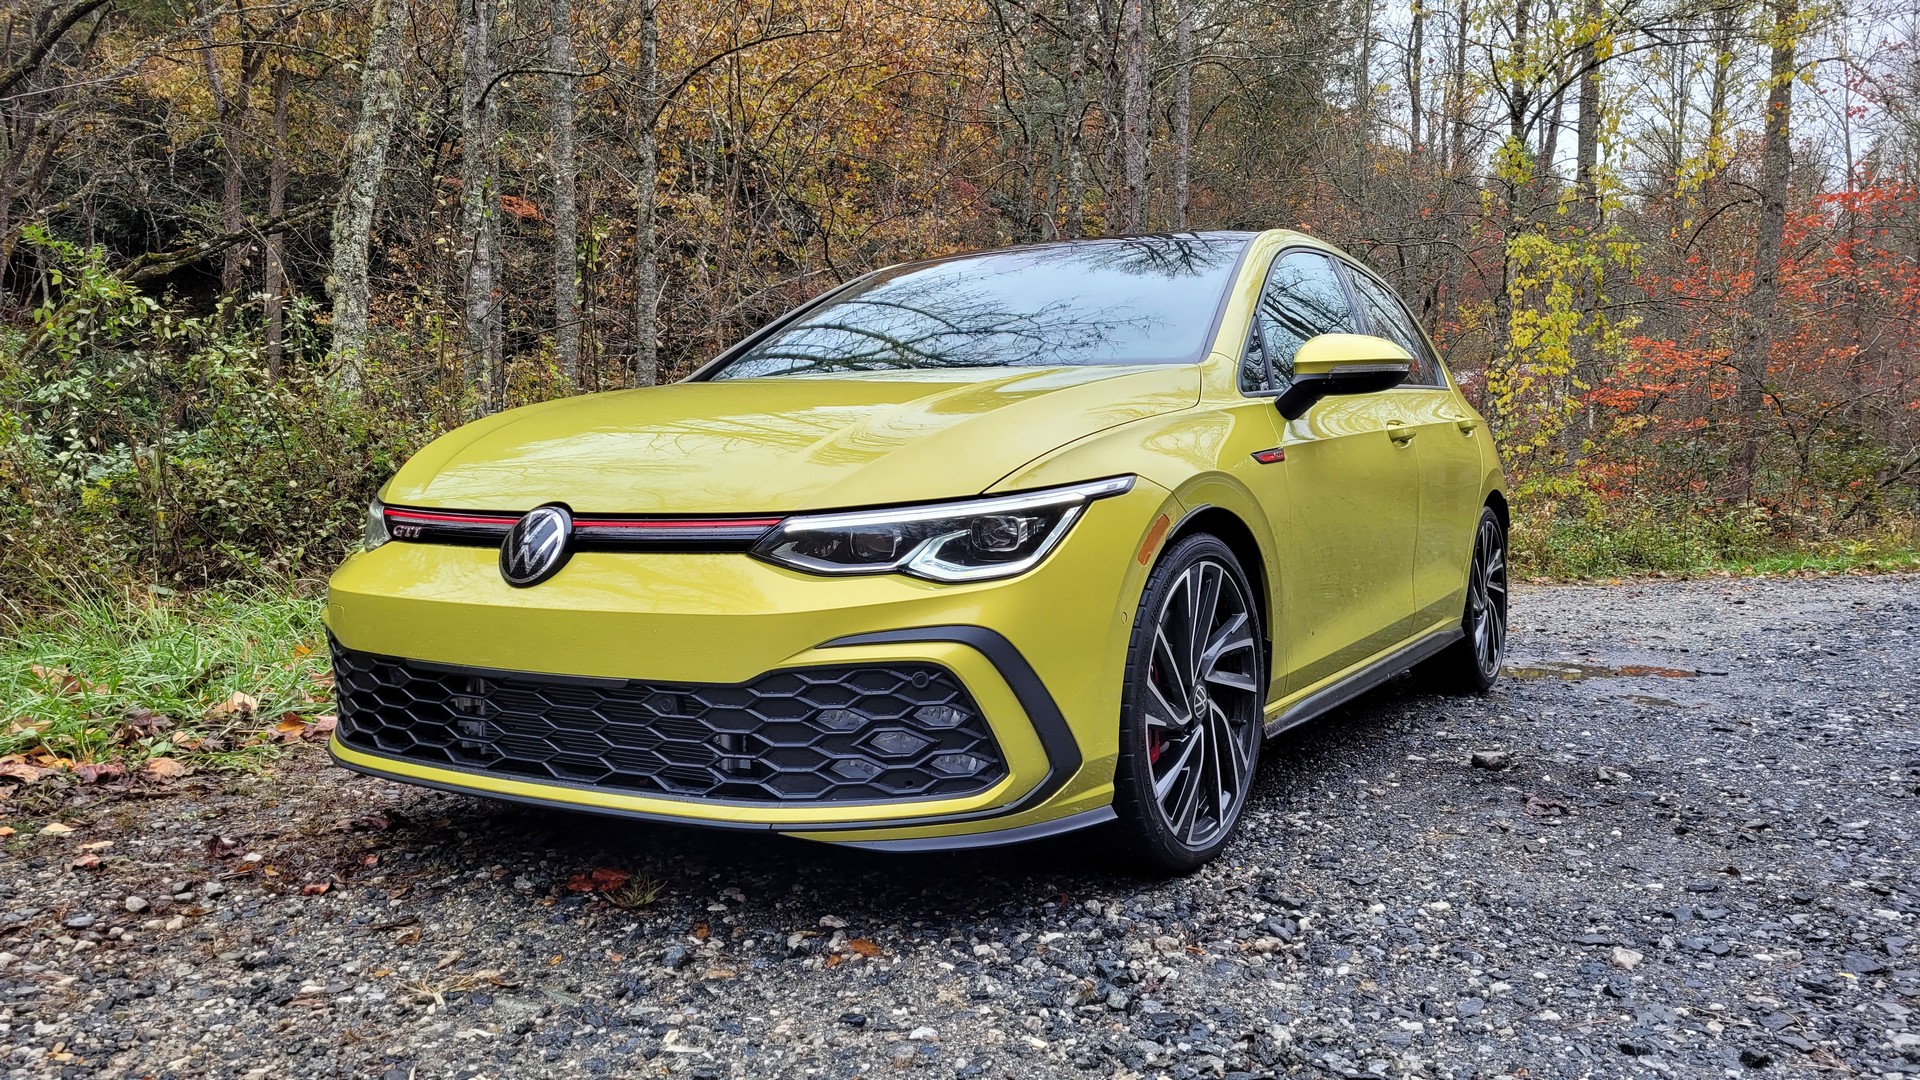 Driven: The 2022 Golf GTI And Golf R Are Hot Hatch Dynamos | Carscoops